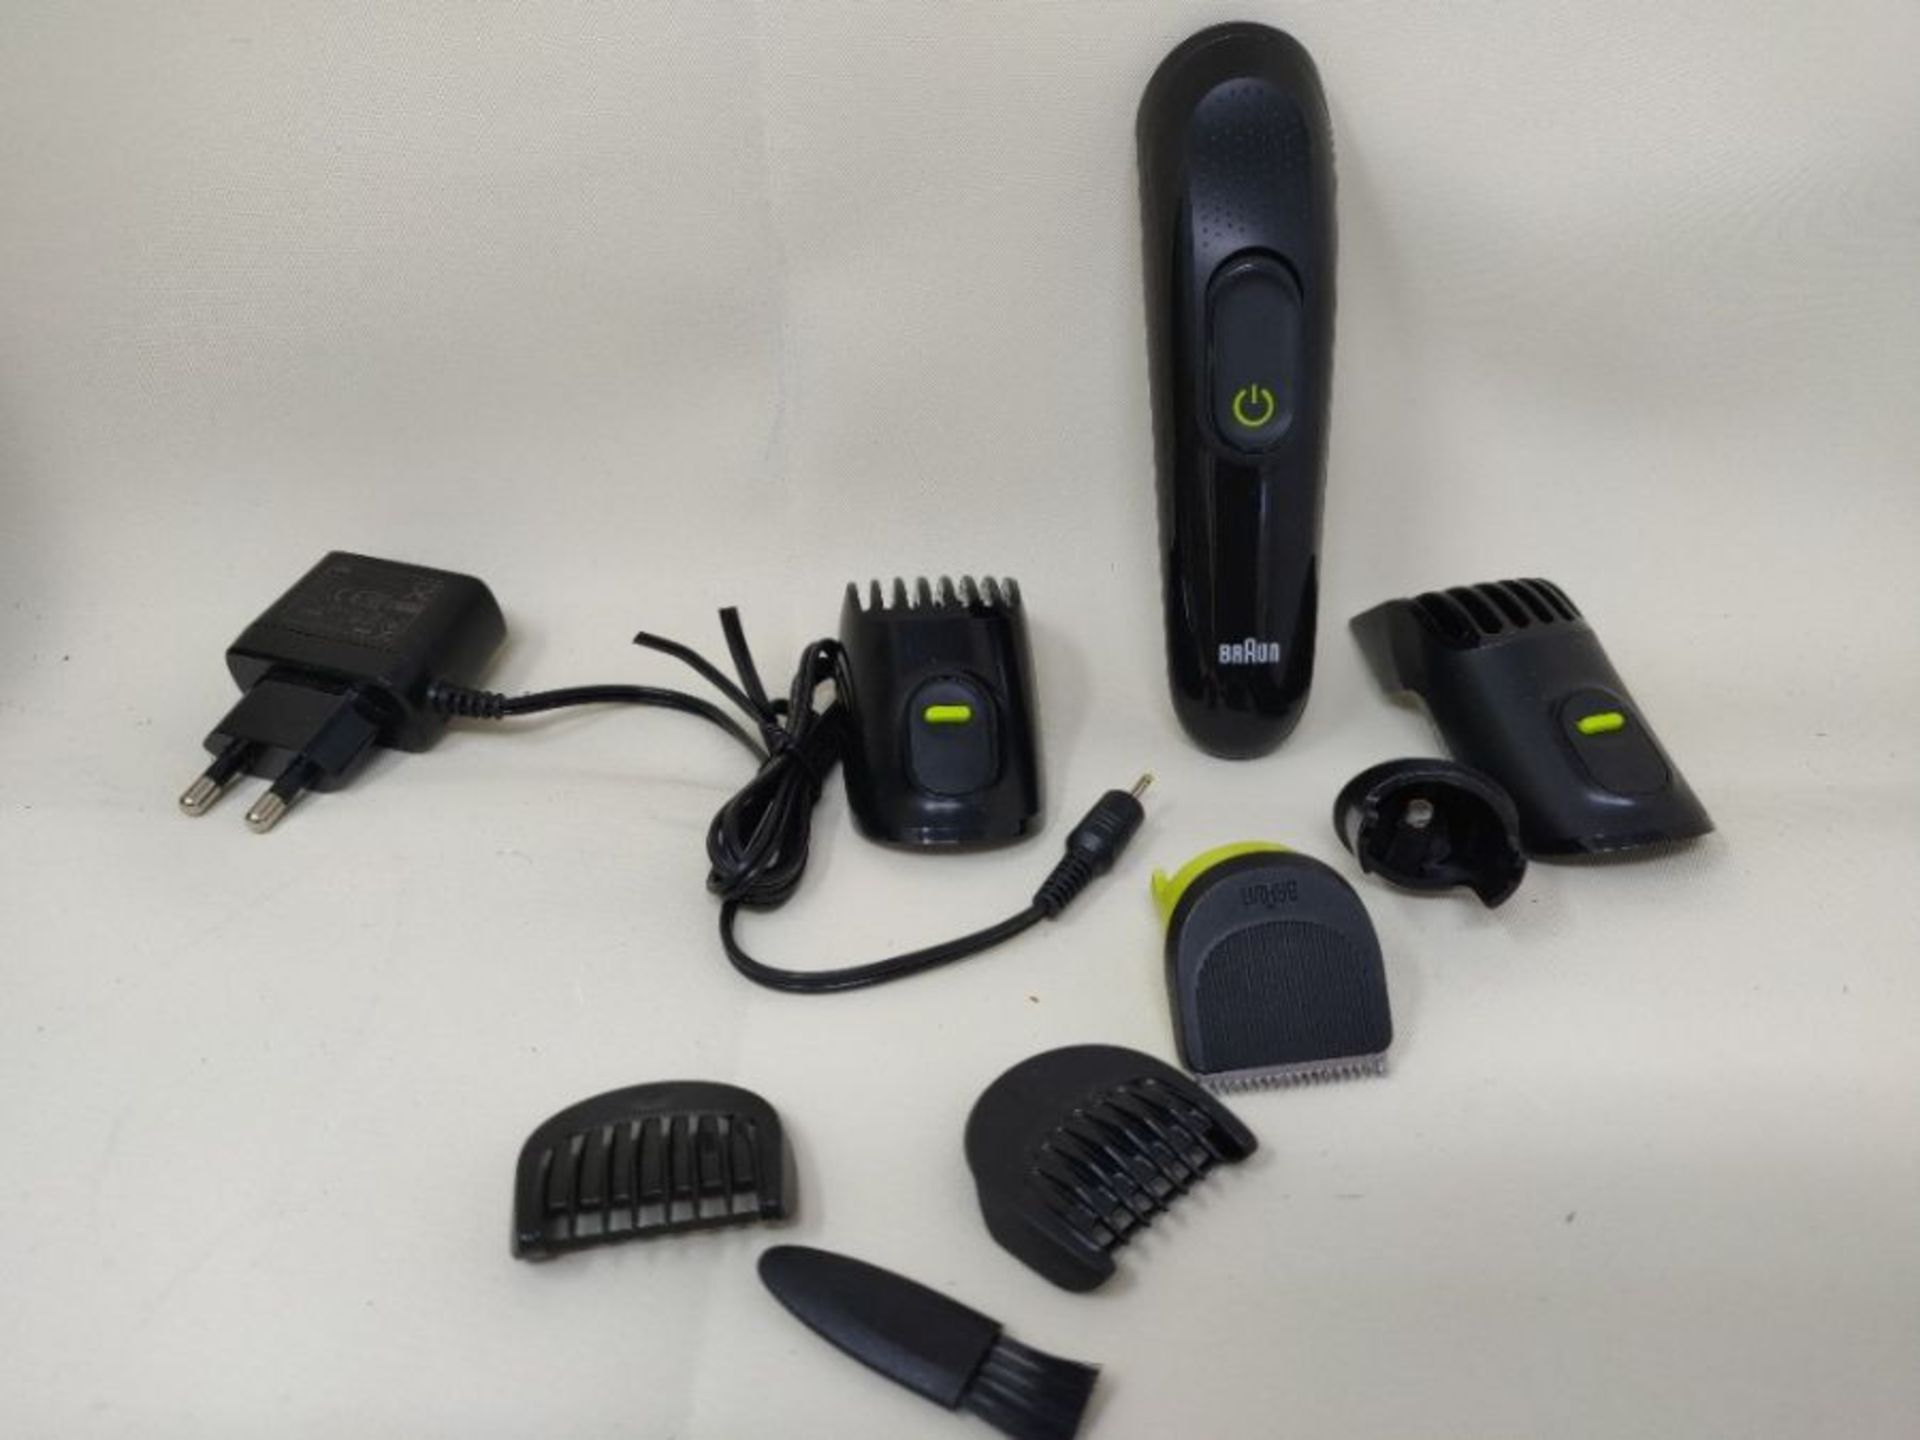 Braun 6-in-1 All-in-one Trimmer 3 MGK3221, Hair Clipper and Beard Trimmer with Lifetim - Image 3 of 3